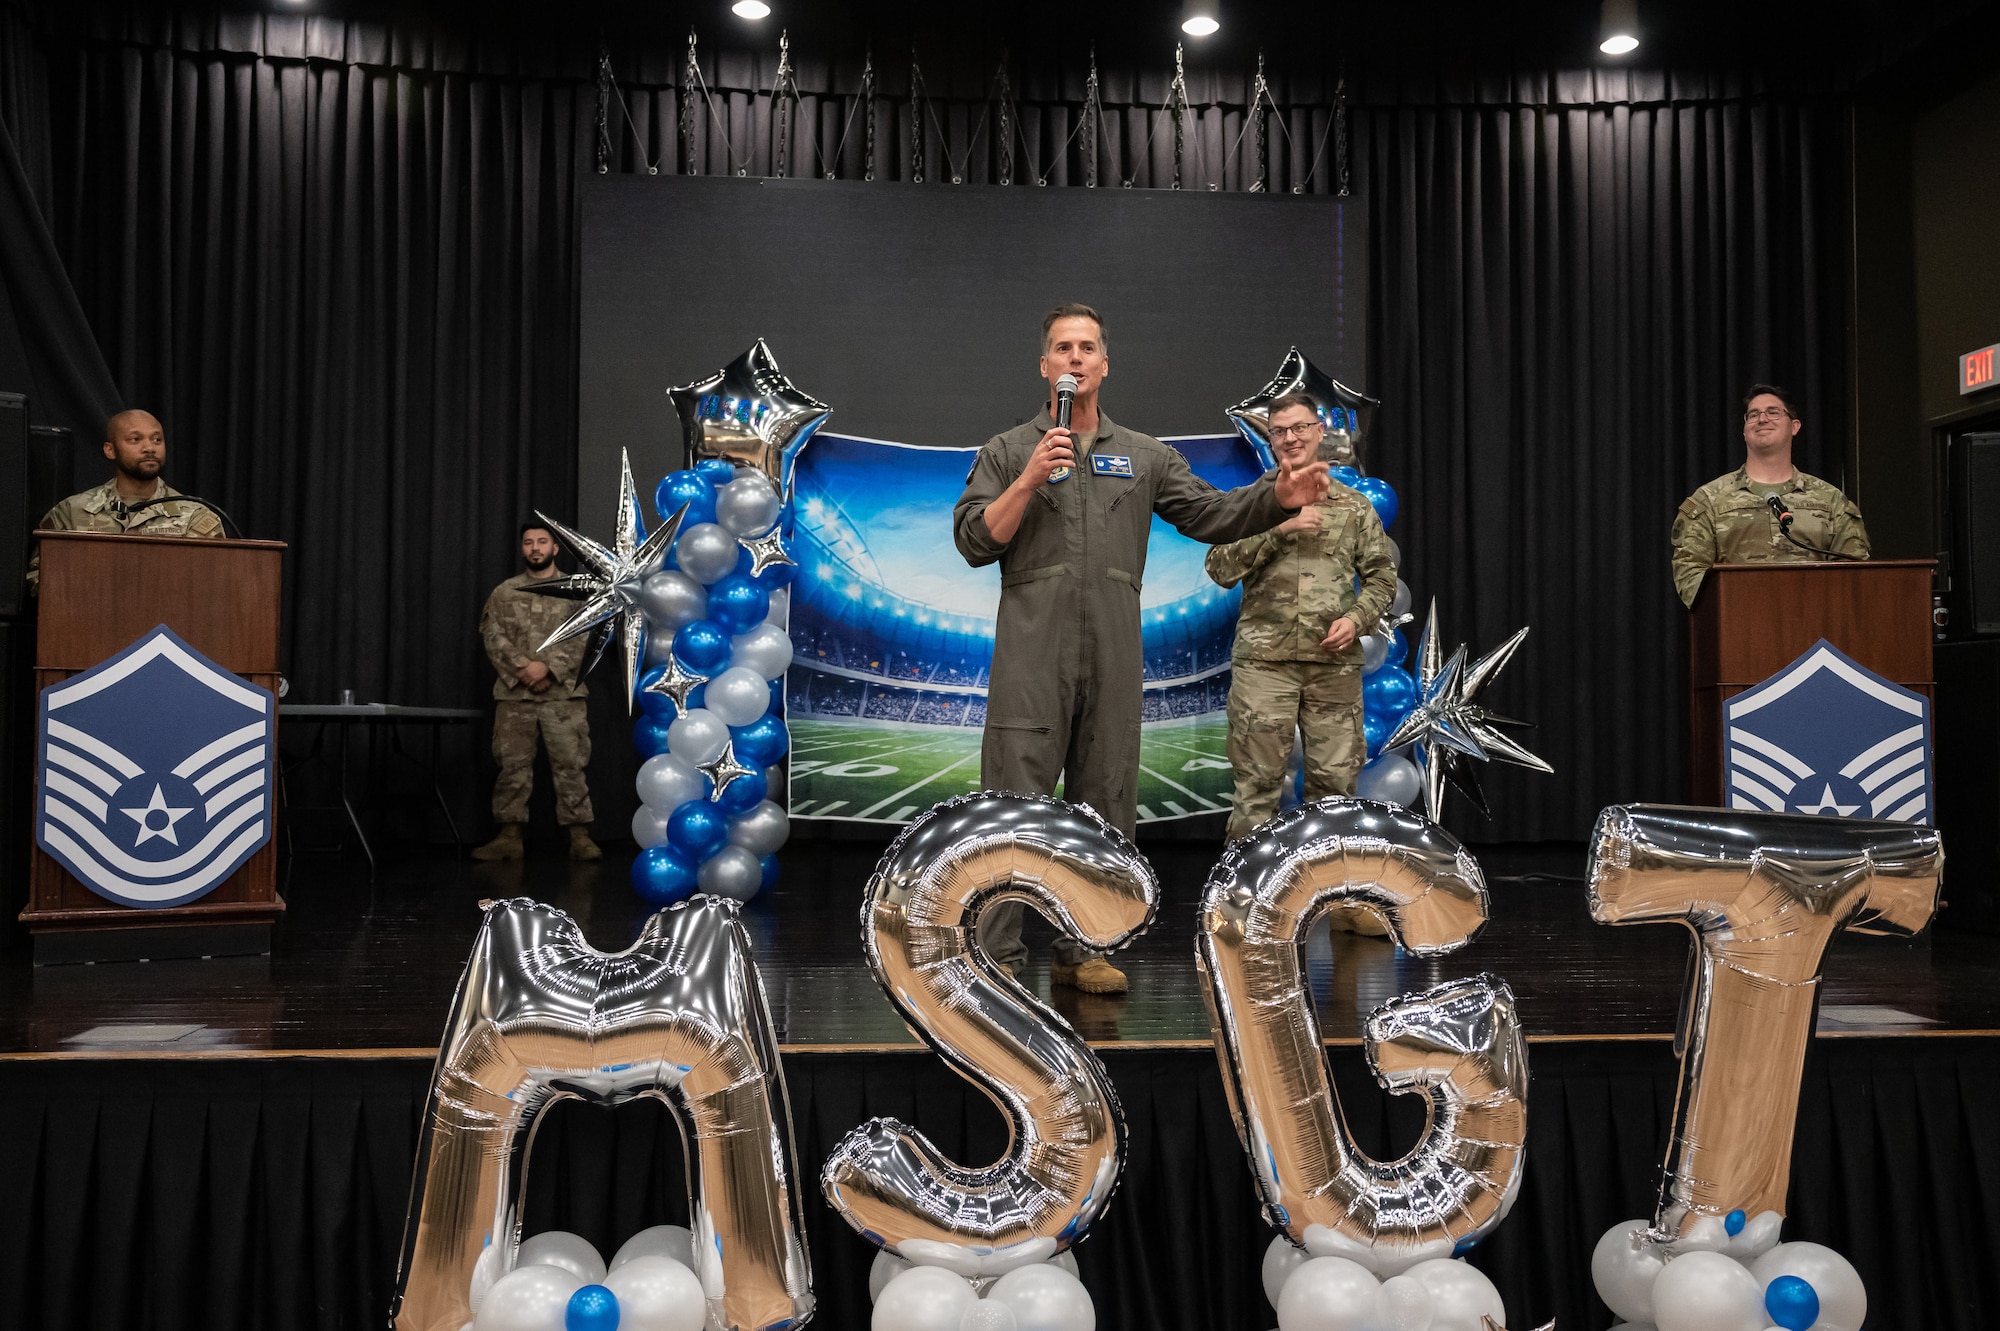 U.S. Air Force Col. Joshua Wood gives an inspirational speech during the Master Sergeant release party at Osan Air Base, Republic of Korea, June 9, 2023. This year, more than 70 USFK Airmen were selected for the rank of Master Sgt. (U.S. Air Force photo by Senior Airman Thomas Sjoberg)